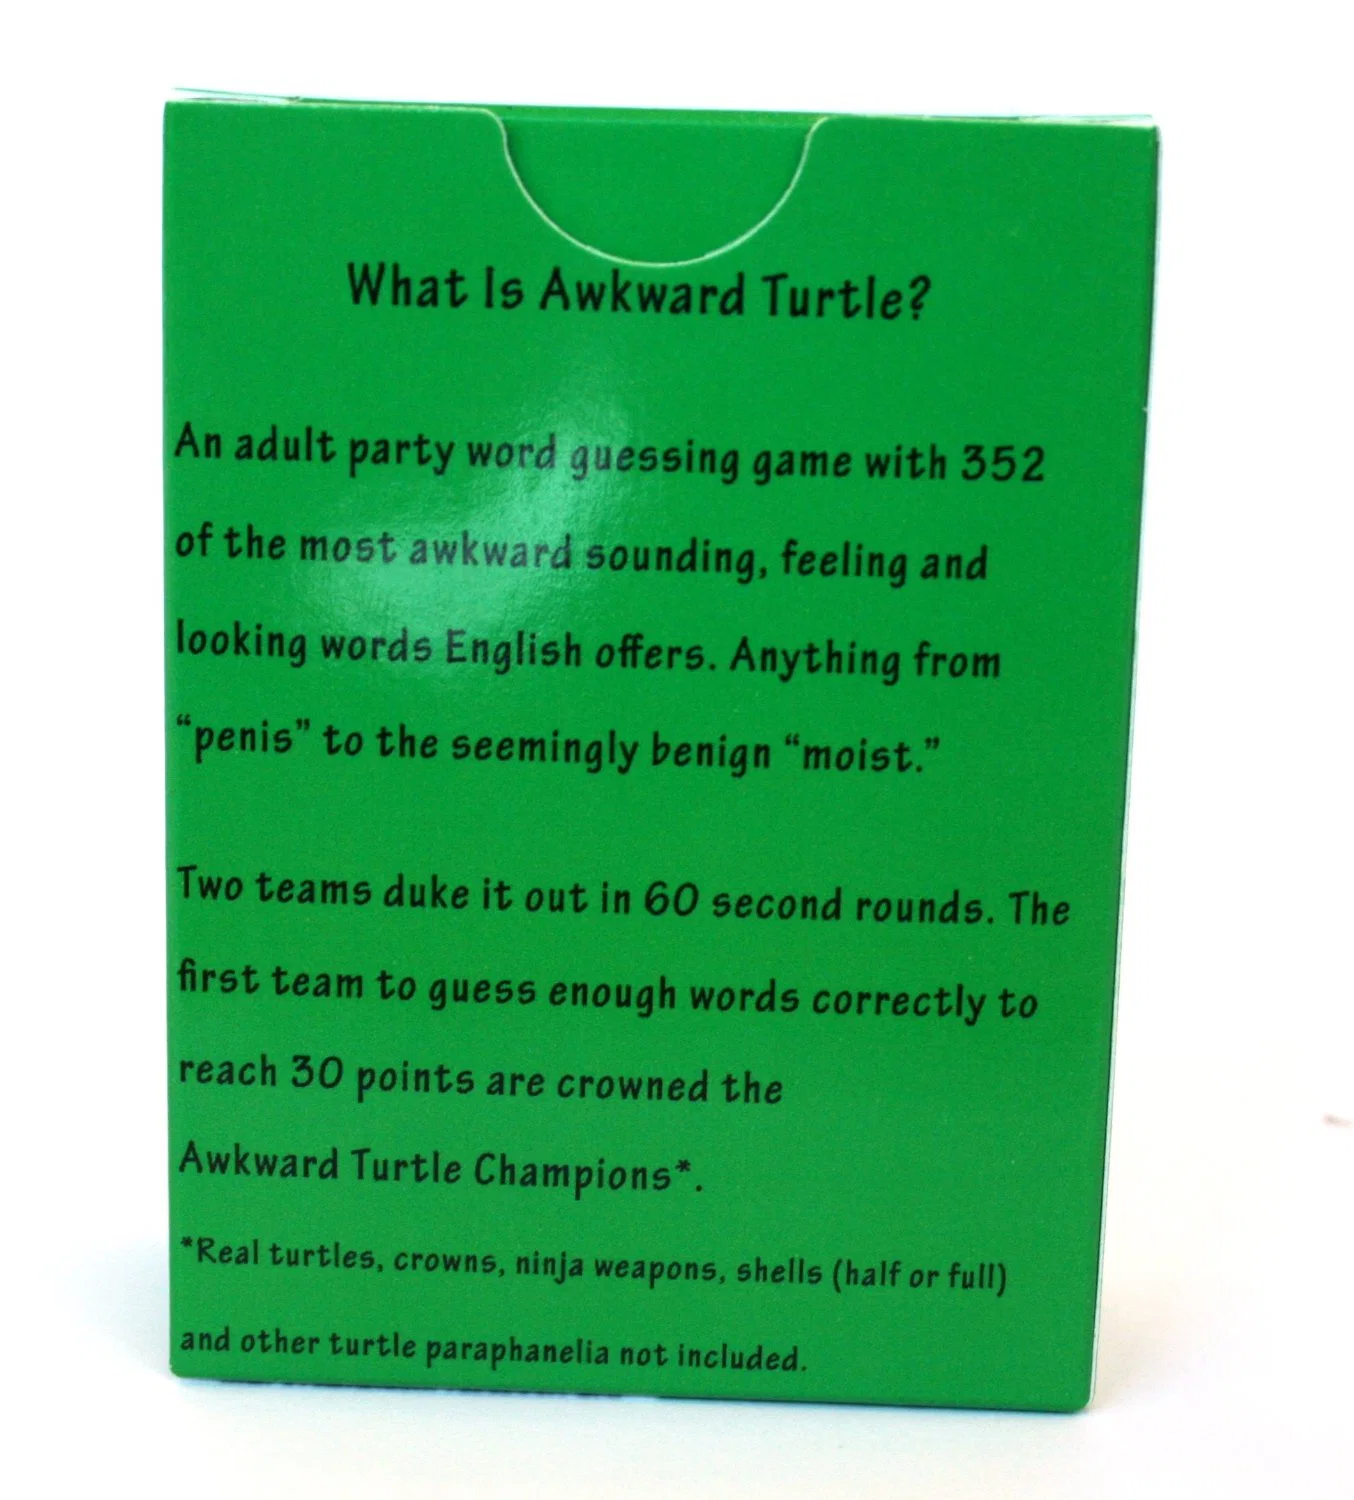 The Party Game - Awkward Turtle - a Crude and Awkward Humor Card Game